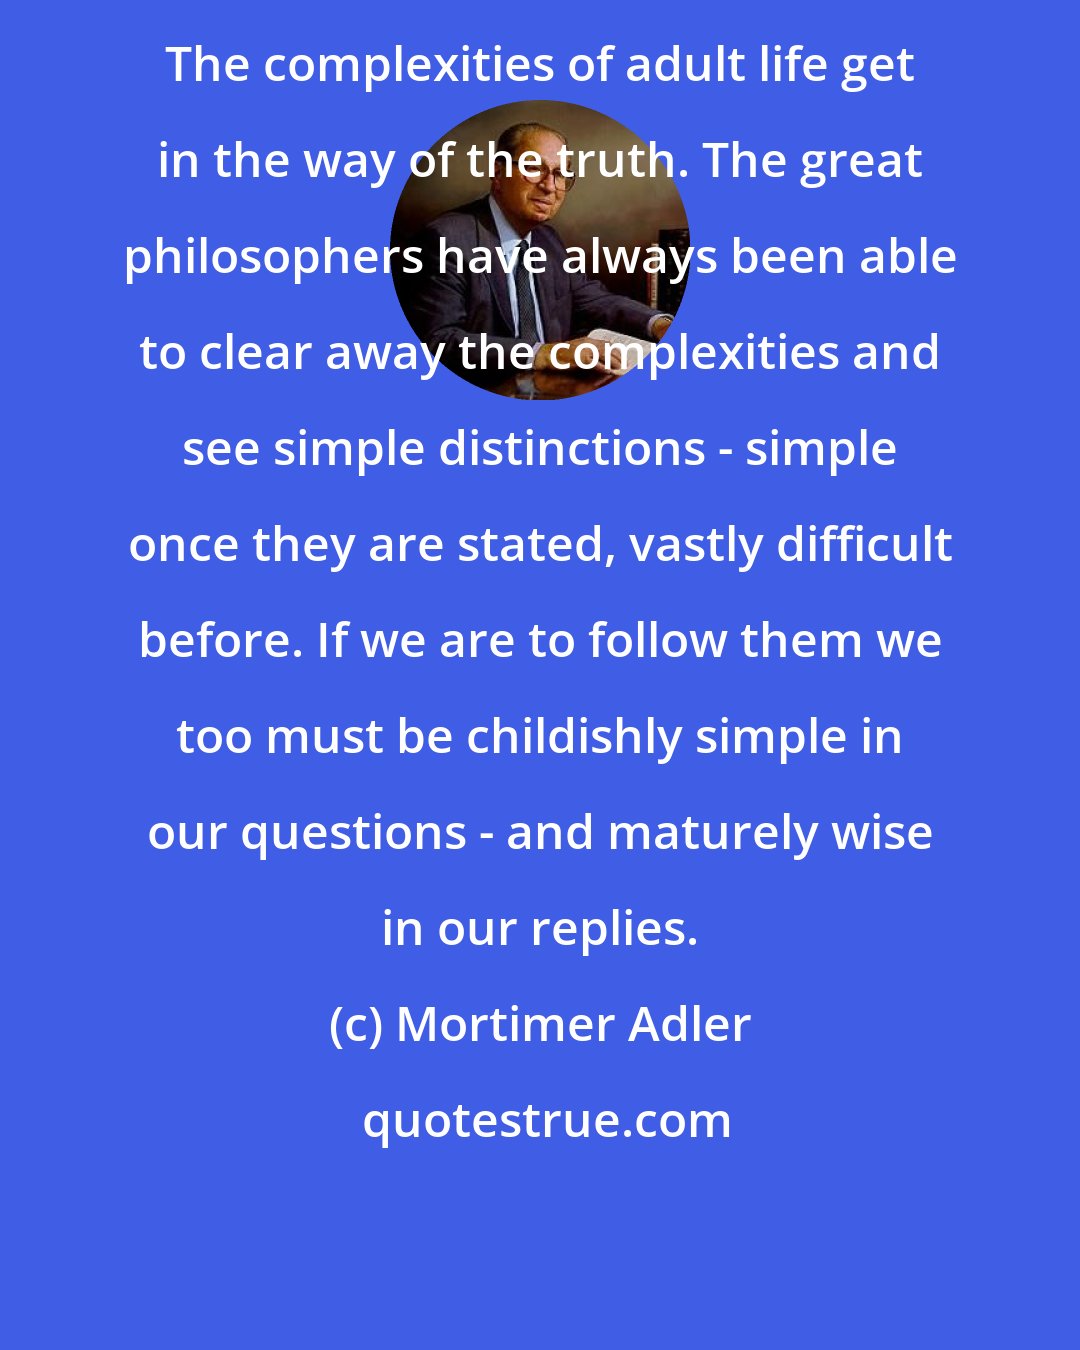 Mortimer Adler: The complexities of adult life get in the way of the truth. The great philosophers have always been able to clear away the complexities and see simple distinctions - simple once they are stated, vastly difficult before. If we are to follow them we too must be childishly simple in our questions - and maturely wise in our replies.